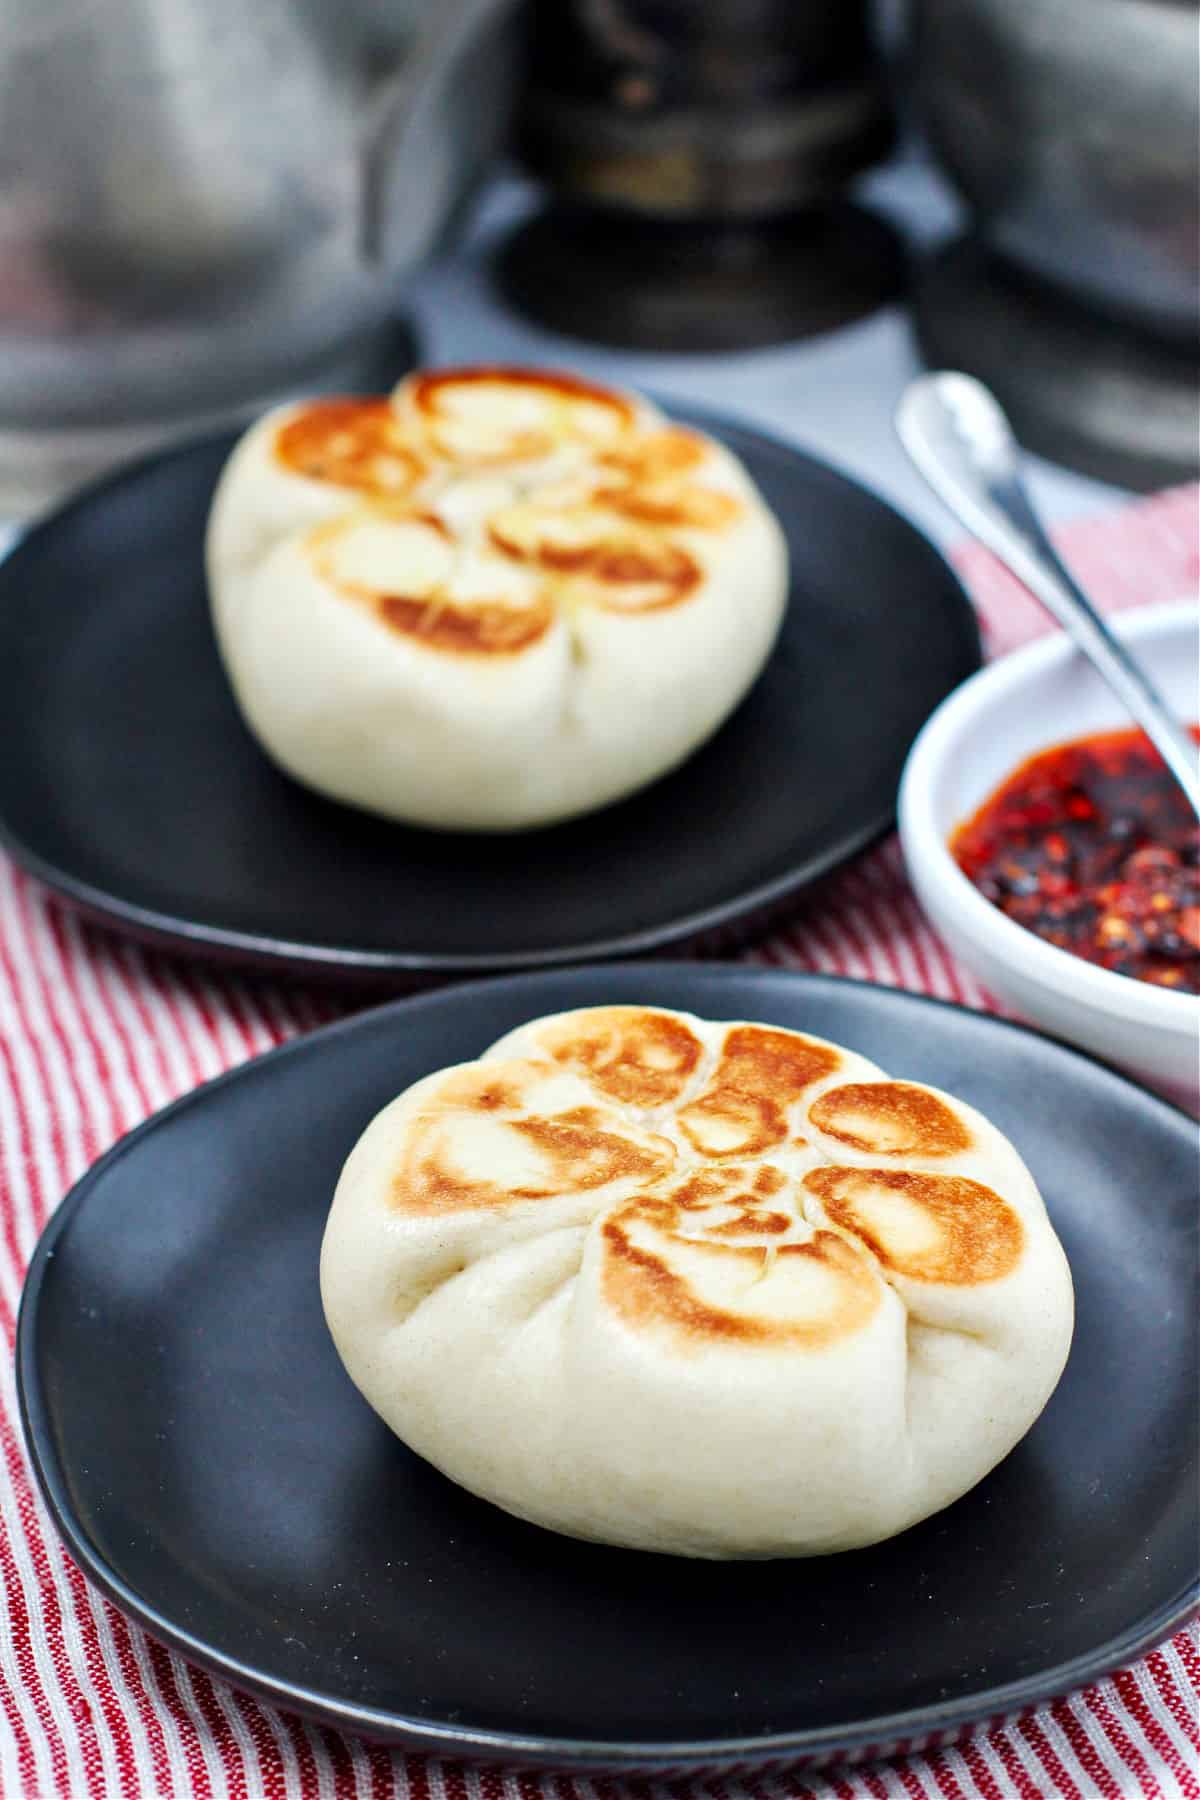 Steamed Chicken and Vegetable Buns on plates.